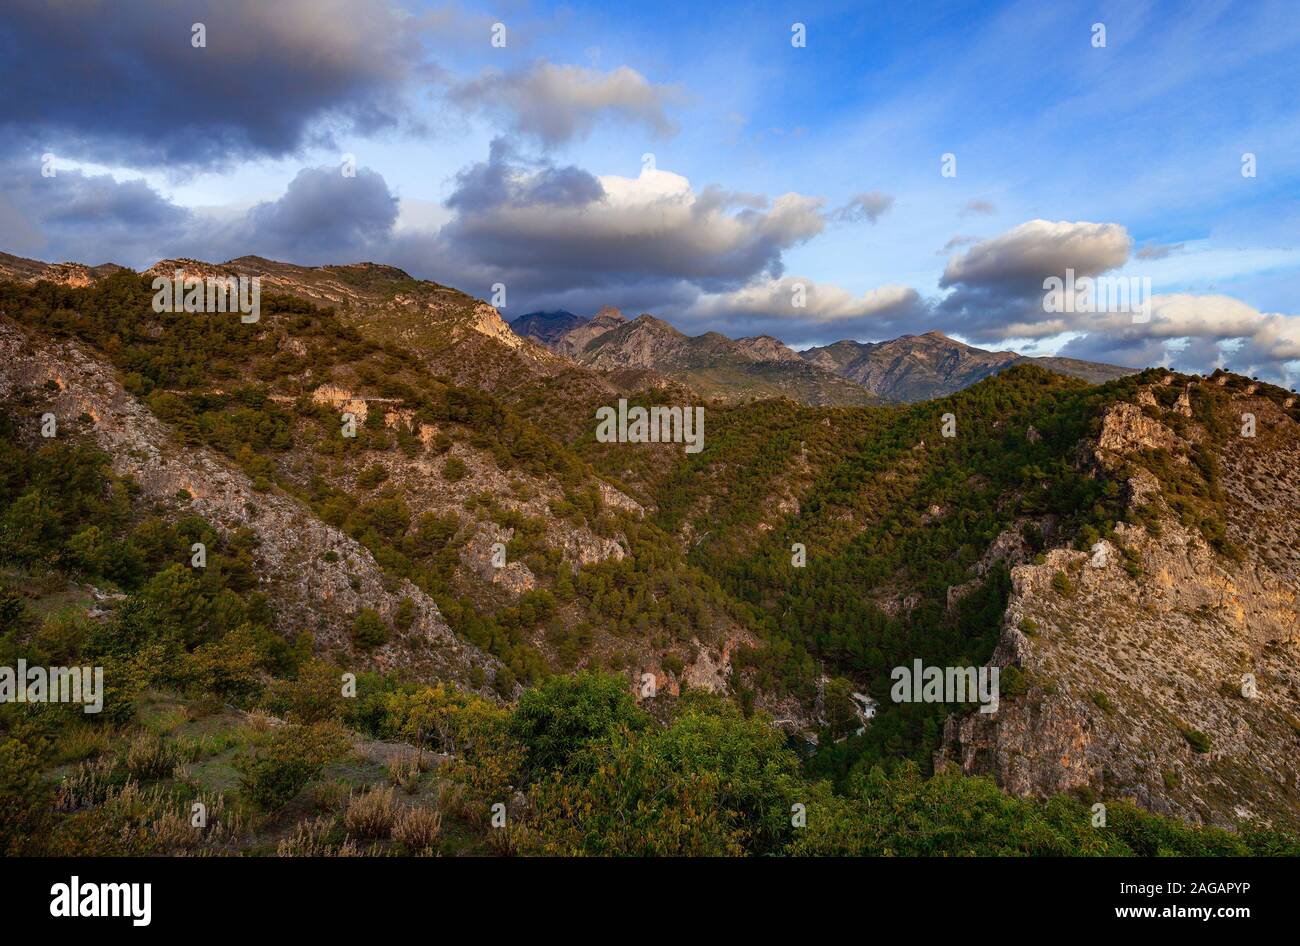 The Sierra de Enmedio, mountain massif rising a behind Frigiliana in the province of Malaga, Andalusia, Spain. Stock Photo